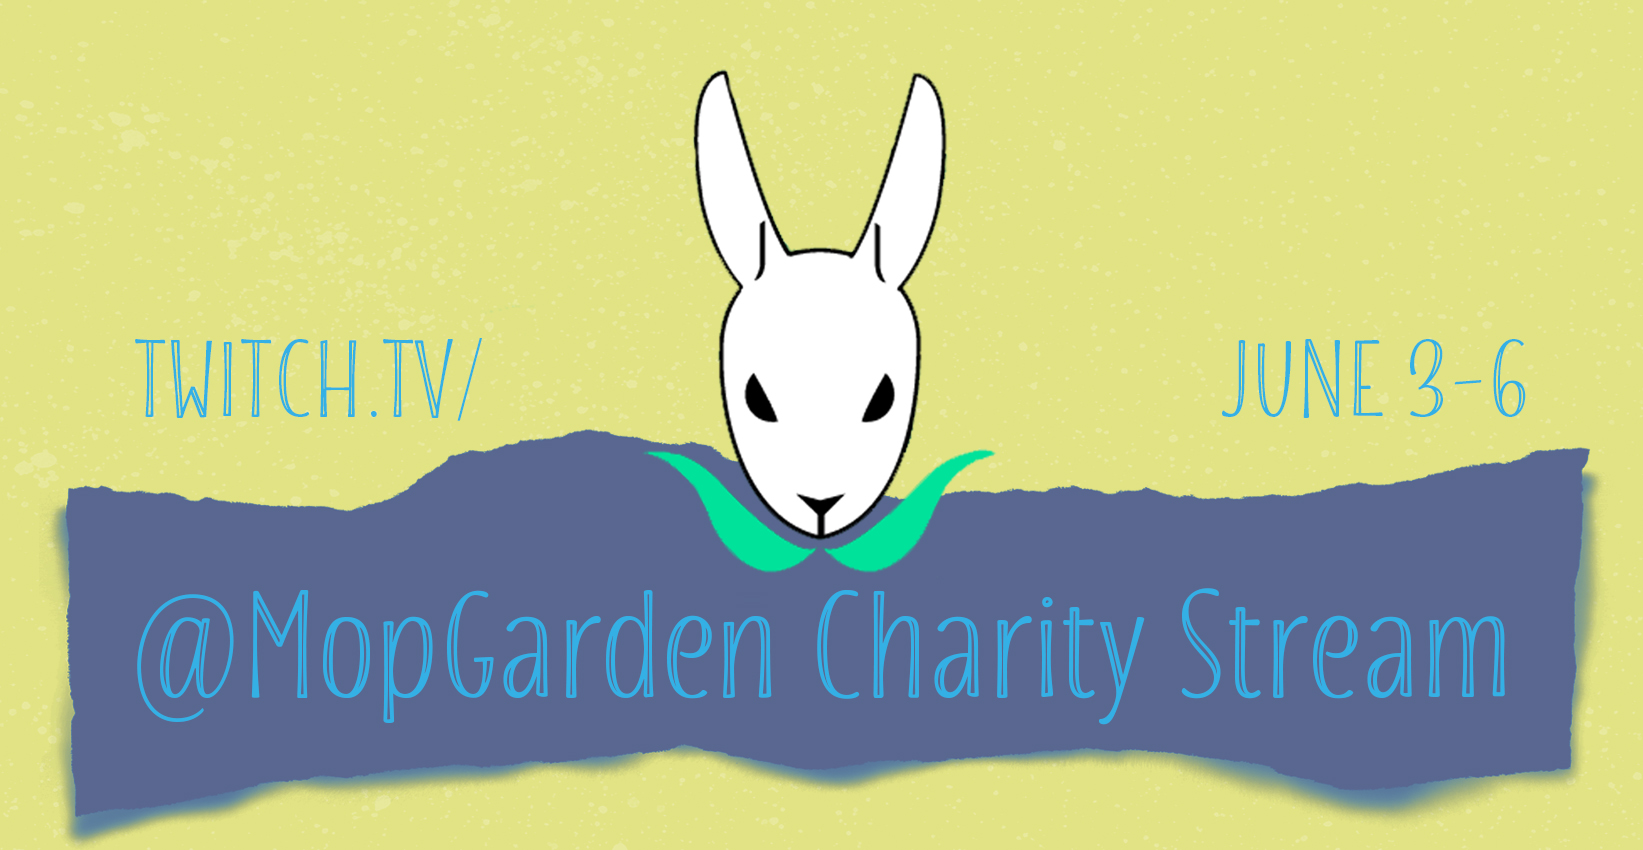 A lime green graphic with a purple paper cutout and blue text overtop that reads "MopGarden Charity Stream" above the purple paper in blue reads "Twitch.tv" "June 3 to 6" and a graphic of a white rabbit head.